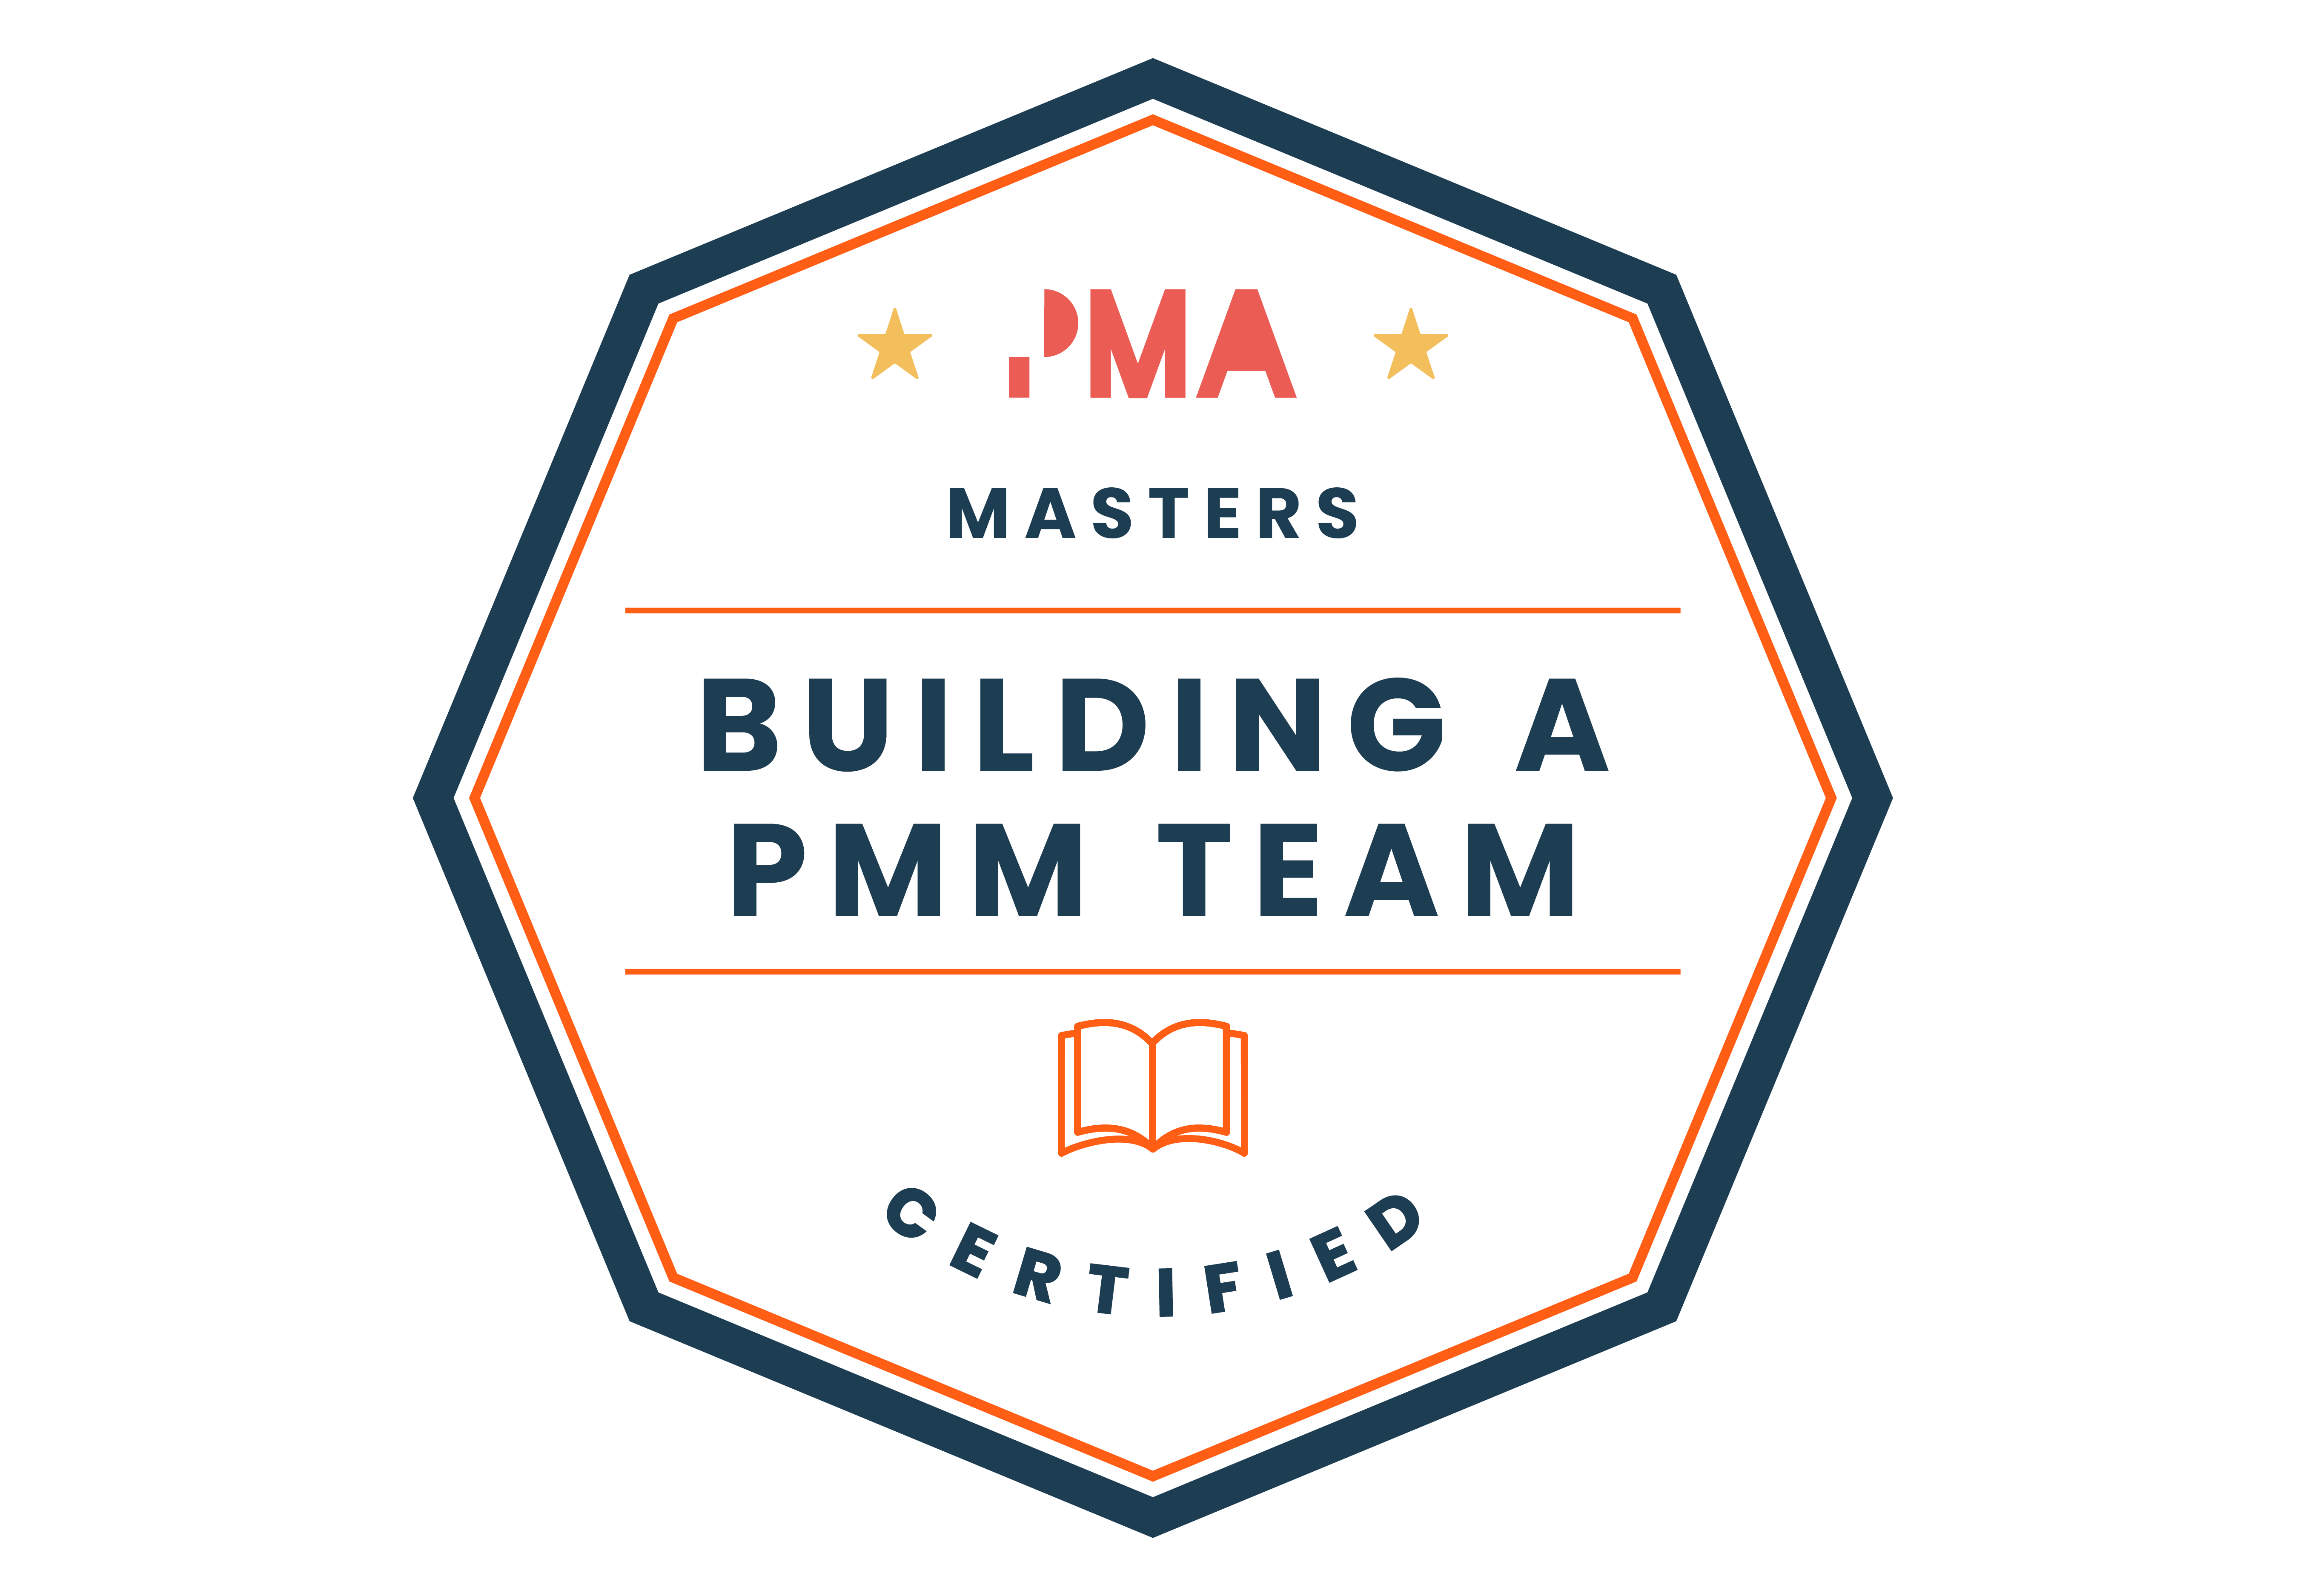 Building a PMM Team Certified | Masters badge